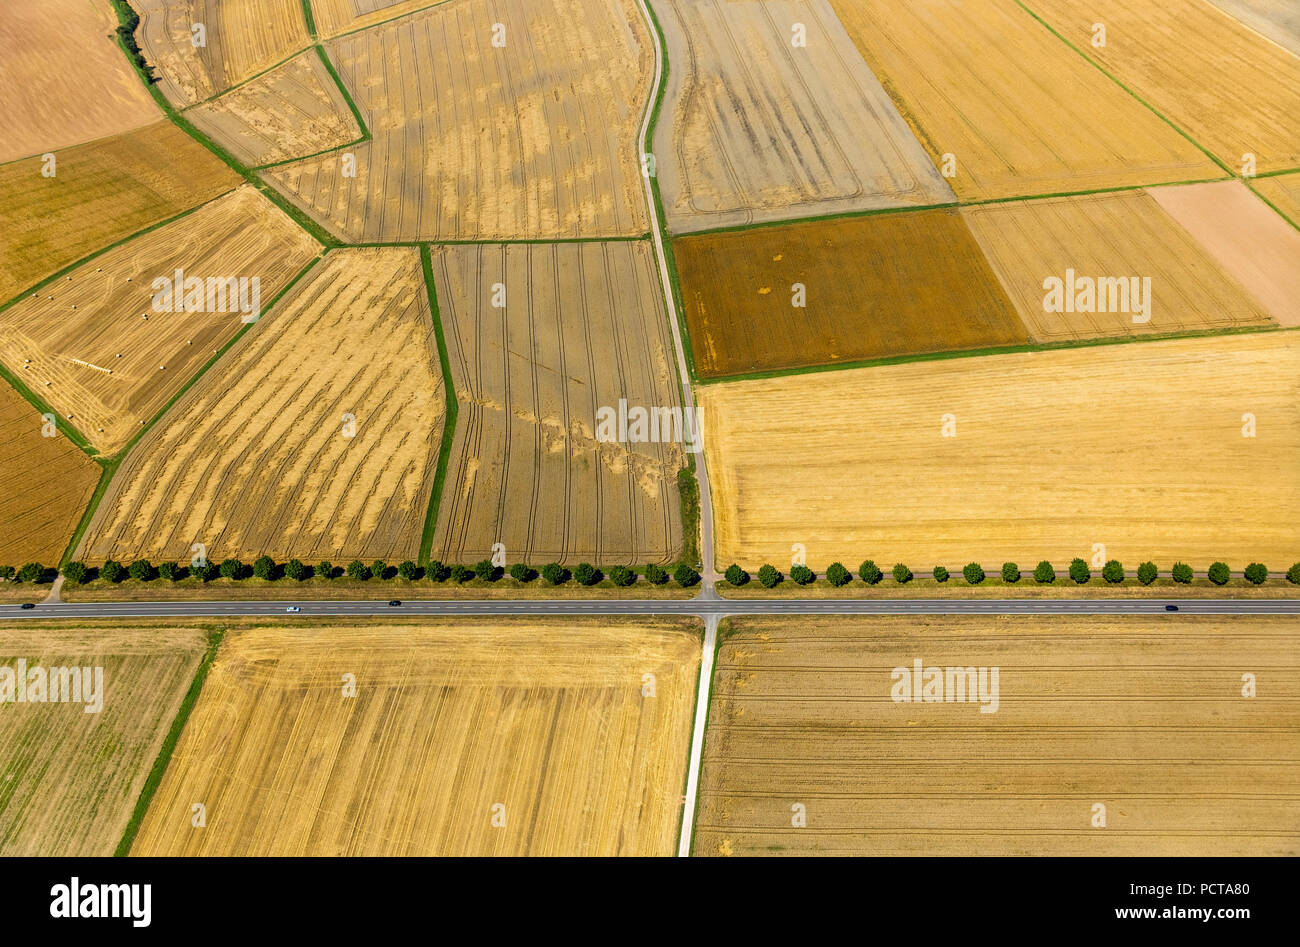 Aerial photo, harvested grain fields, yellow fields, land parcels, tree-lined road in grain fields, agriculture, Limburg an der Lahn, district town of Limburg-Weilburg (district), Hesse, Germany Stock Photo